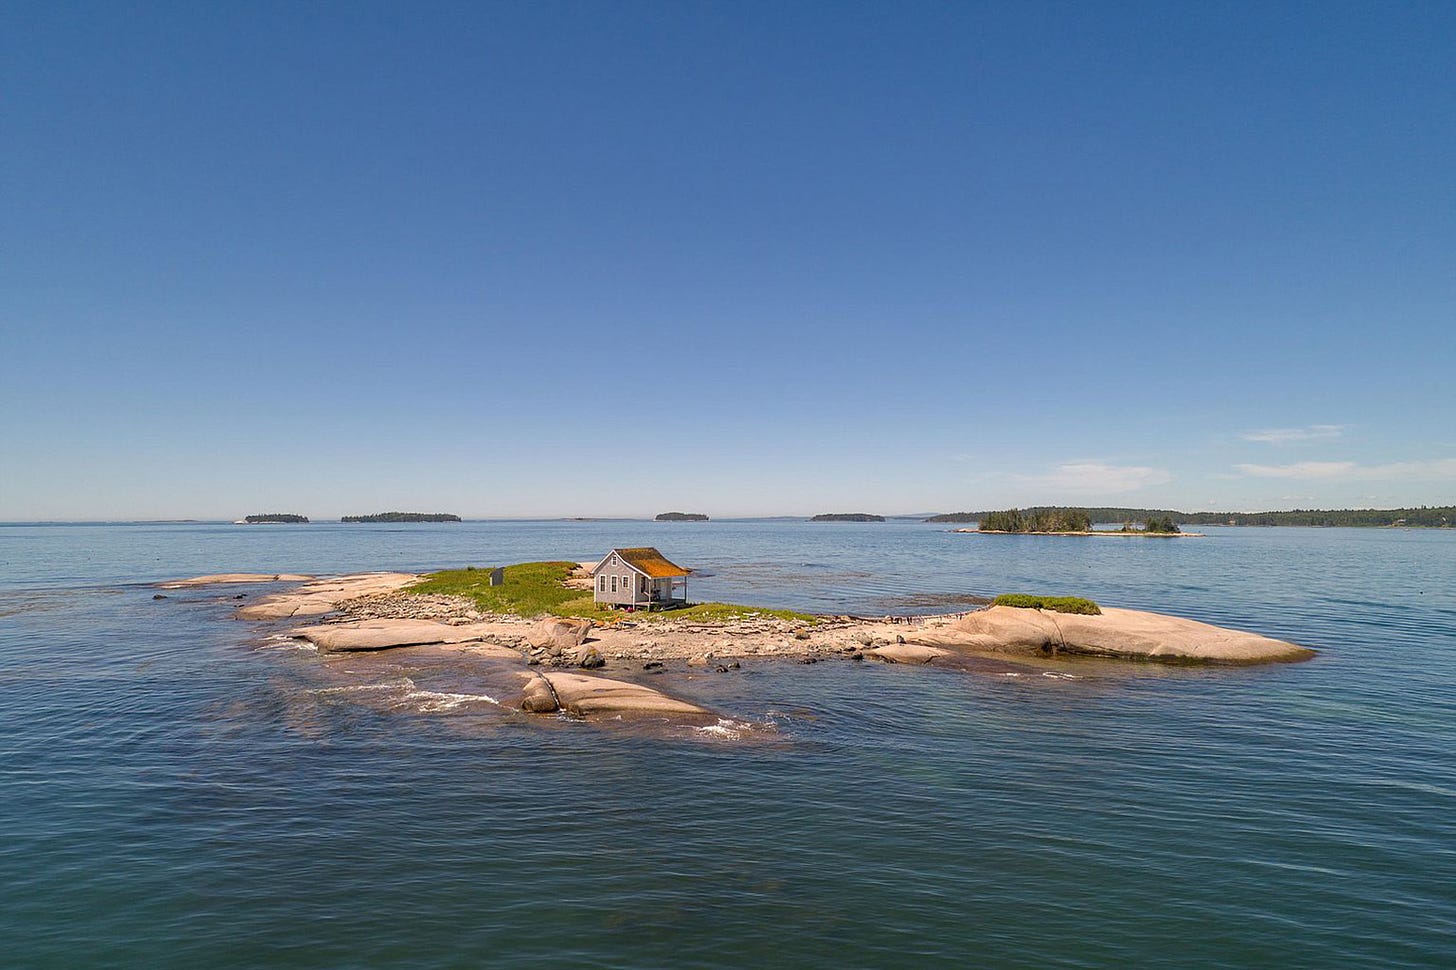 A picture from Zillow of all of Duck Ledges Island and the little house on it. 